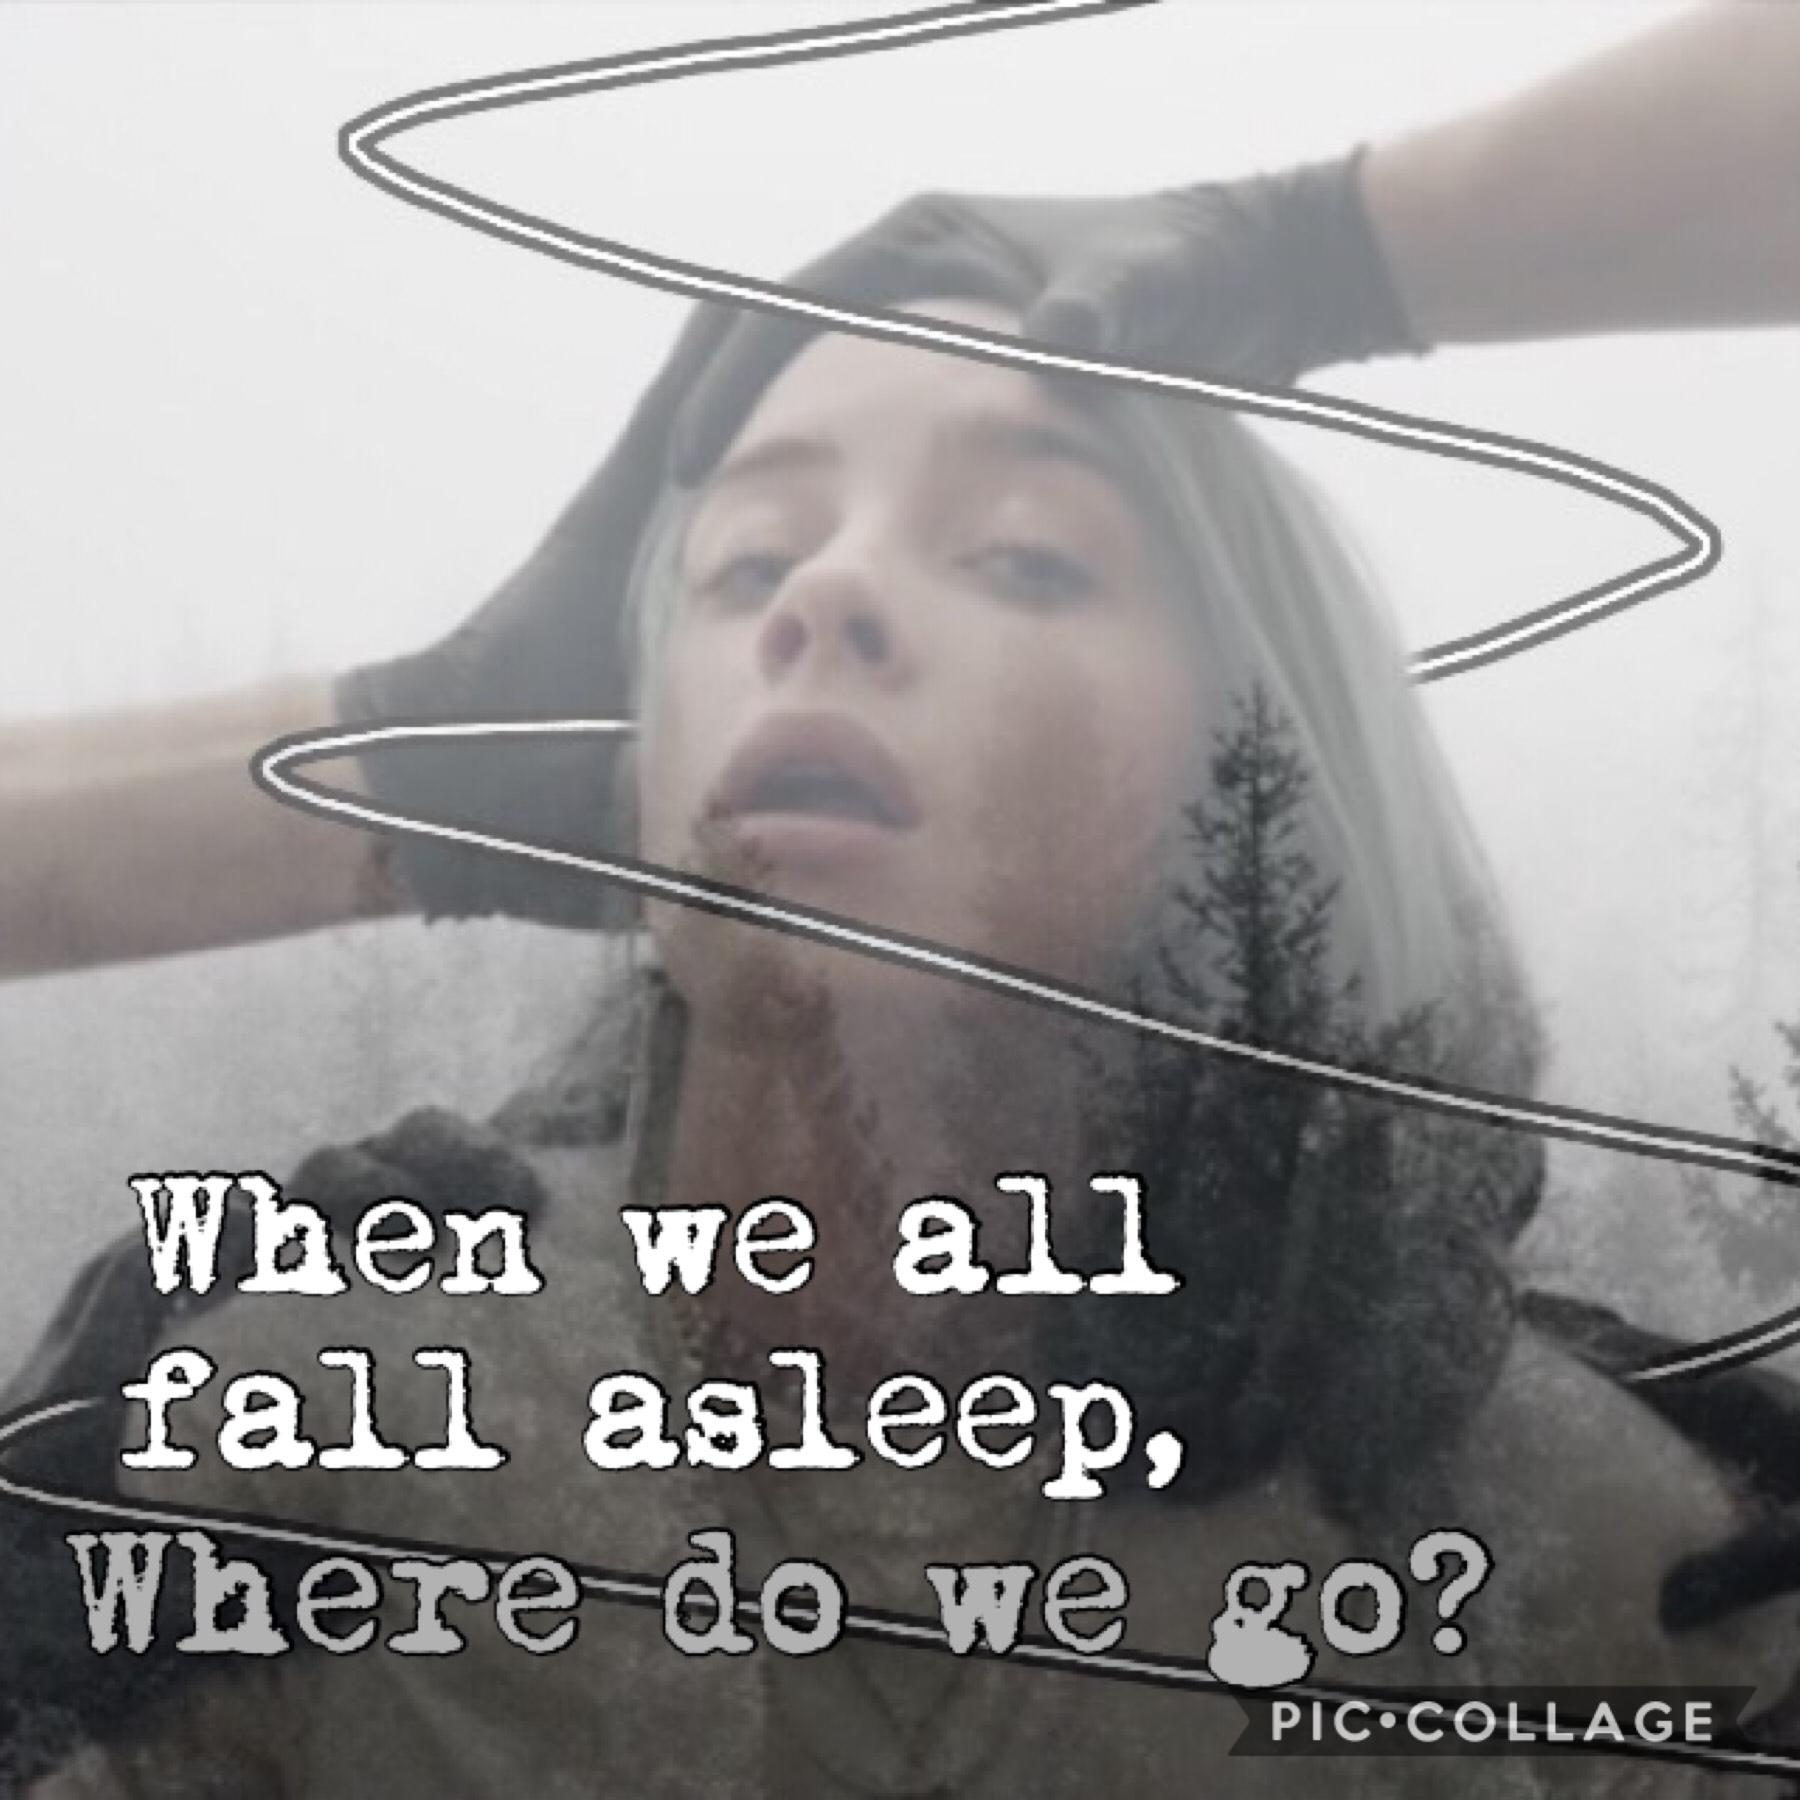 tappp (another Billie edit lol)
I like this one a lot! These are lyrics from Billie’s new song Bury a Friend!